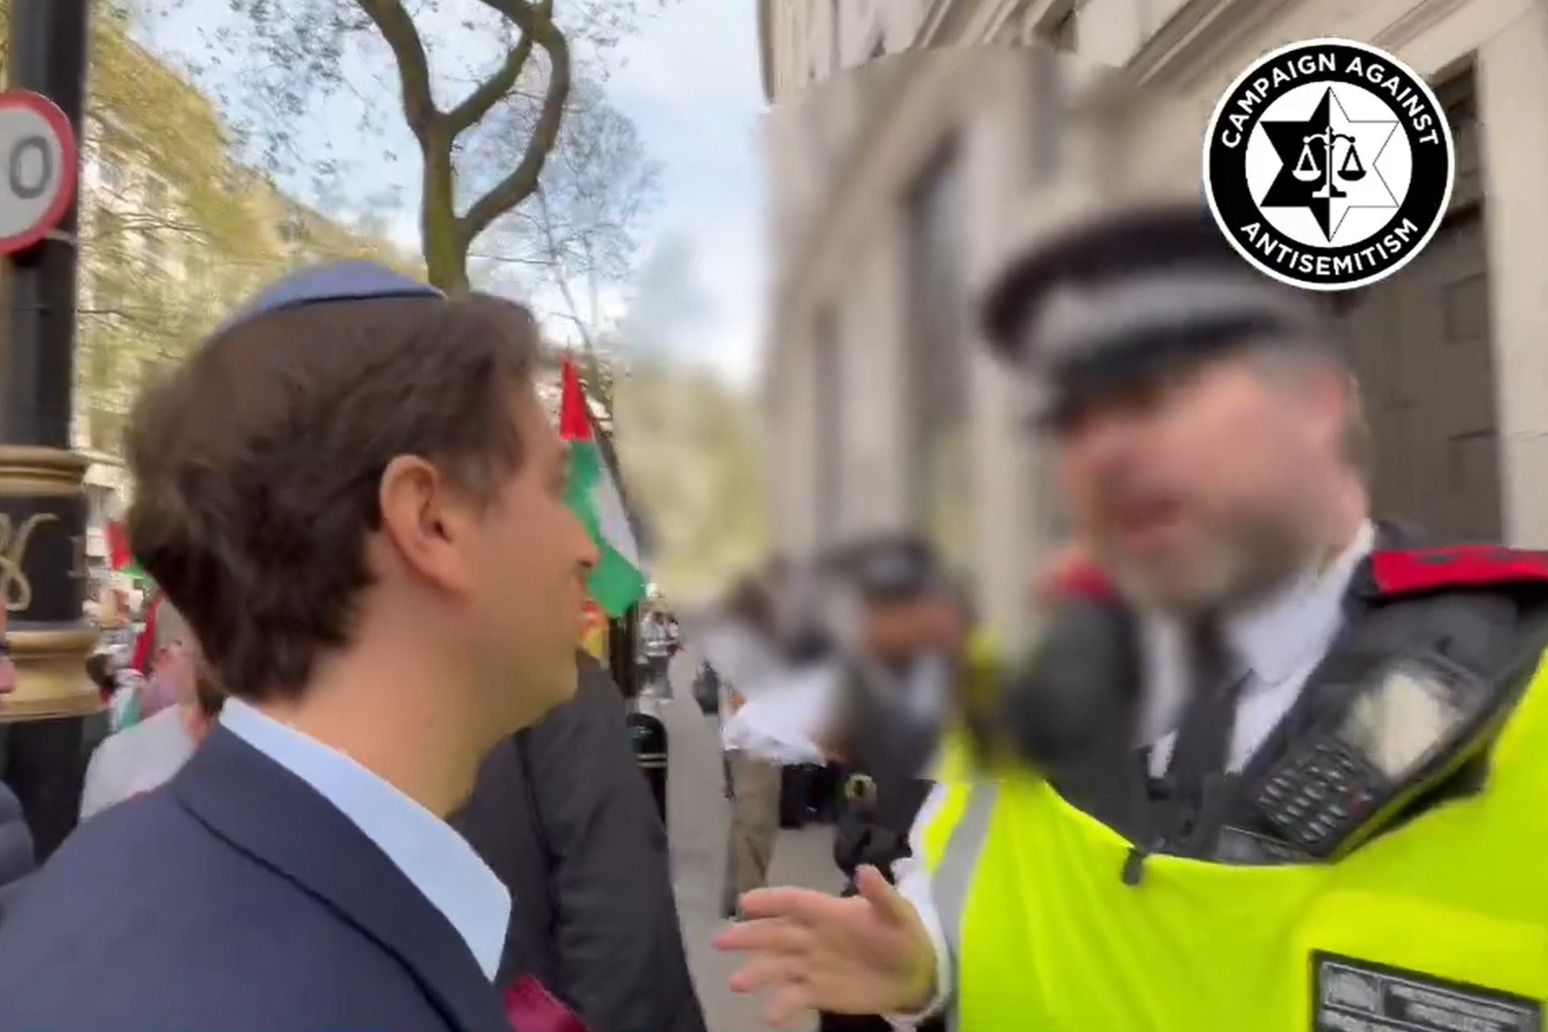 Met apologises after openly Jewish comment by officer near pro Palestine demo